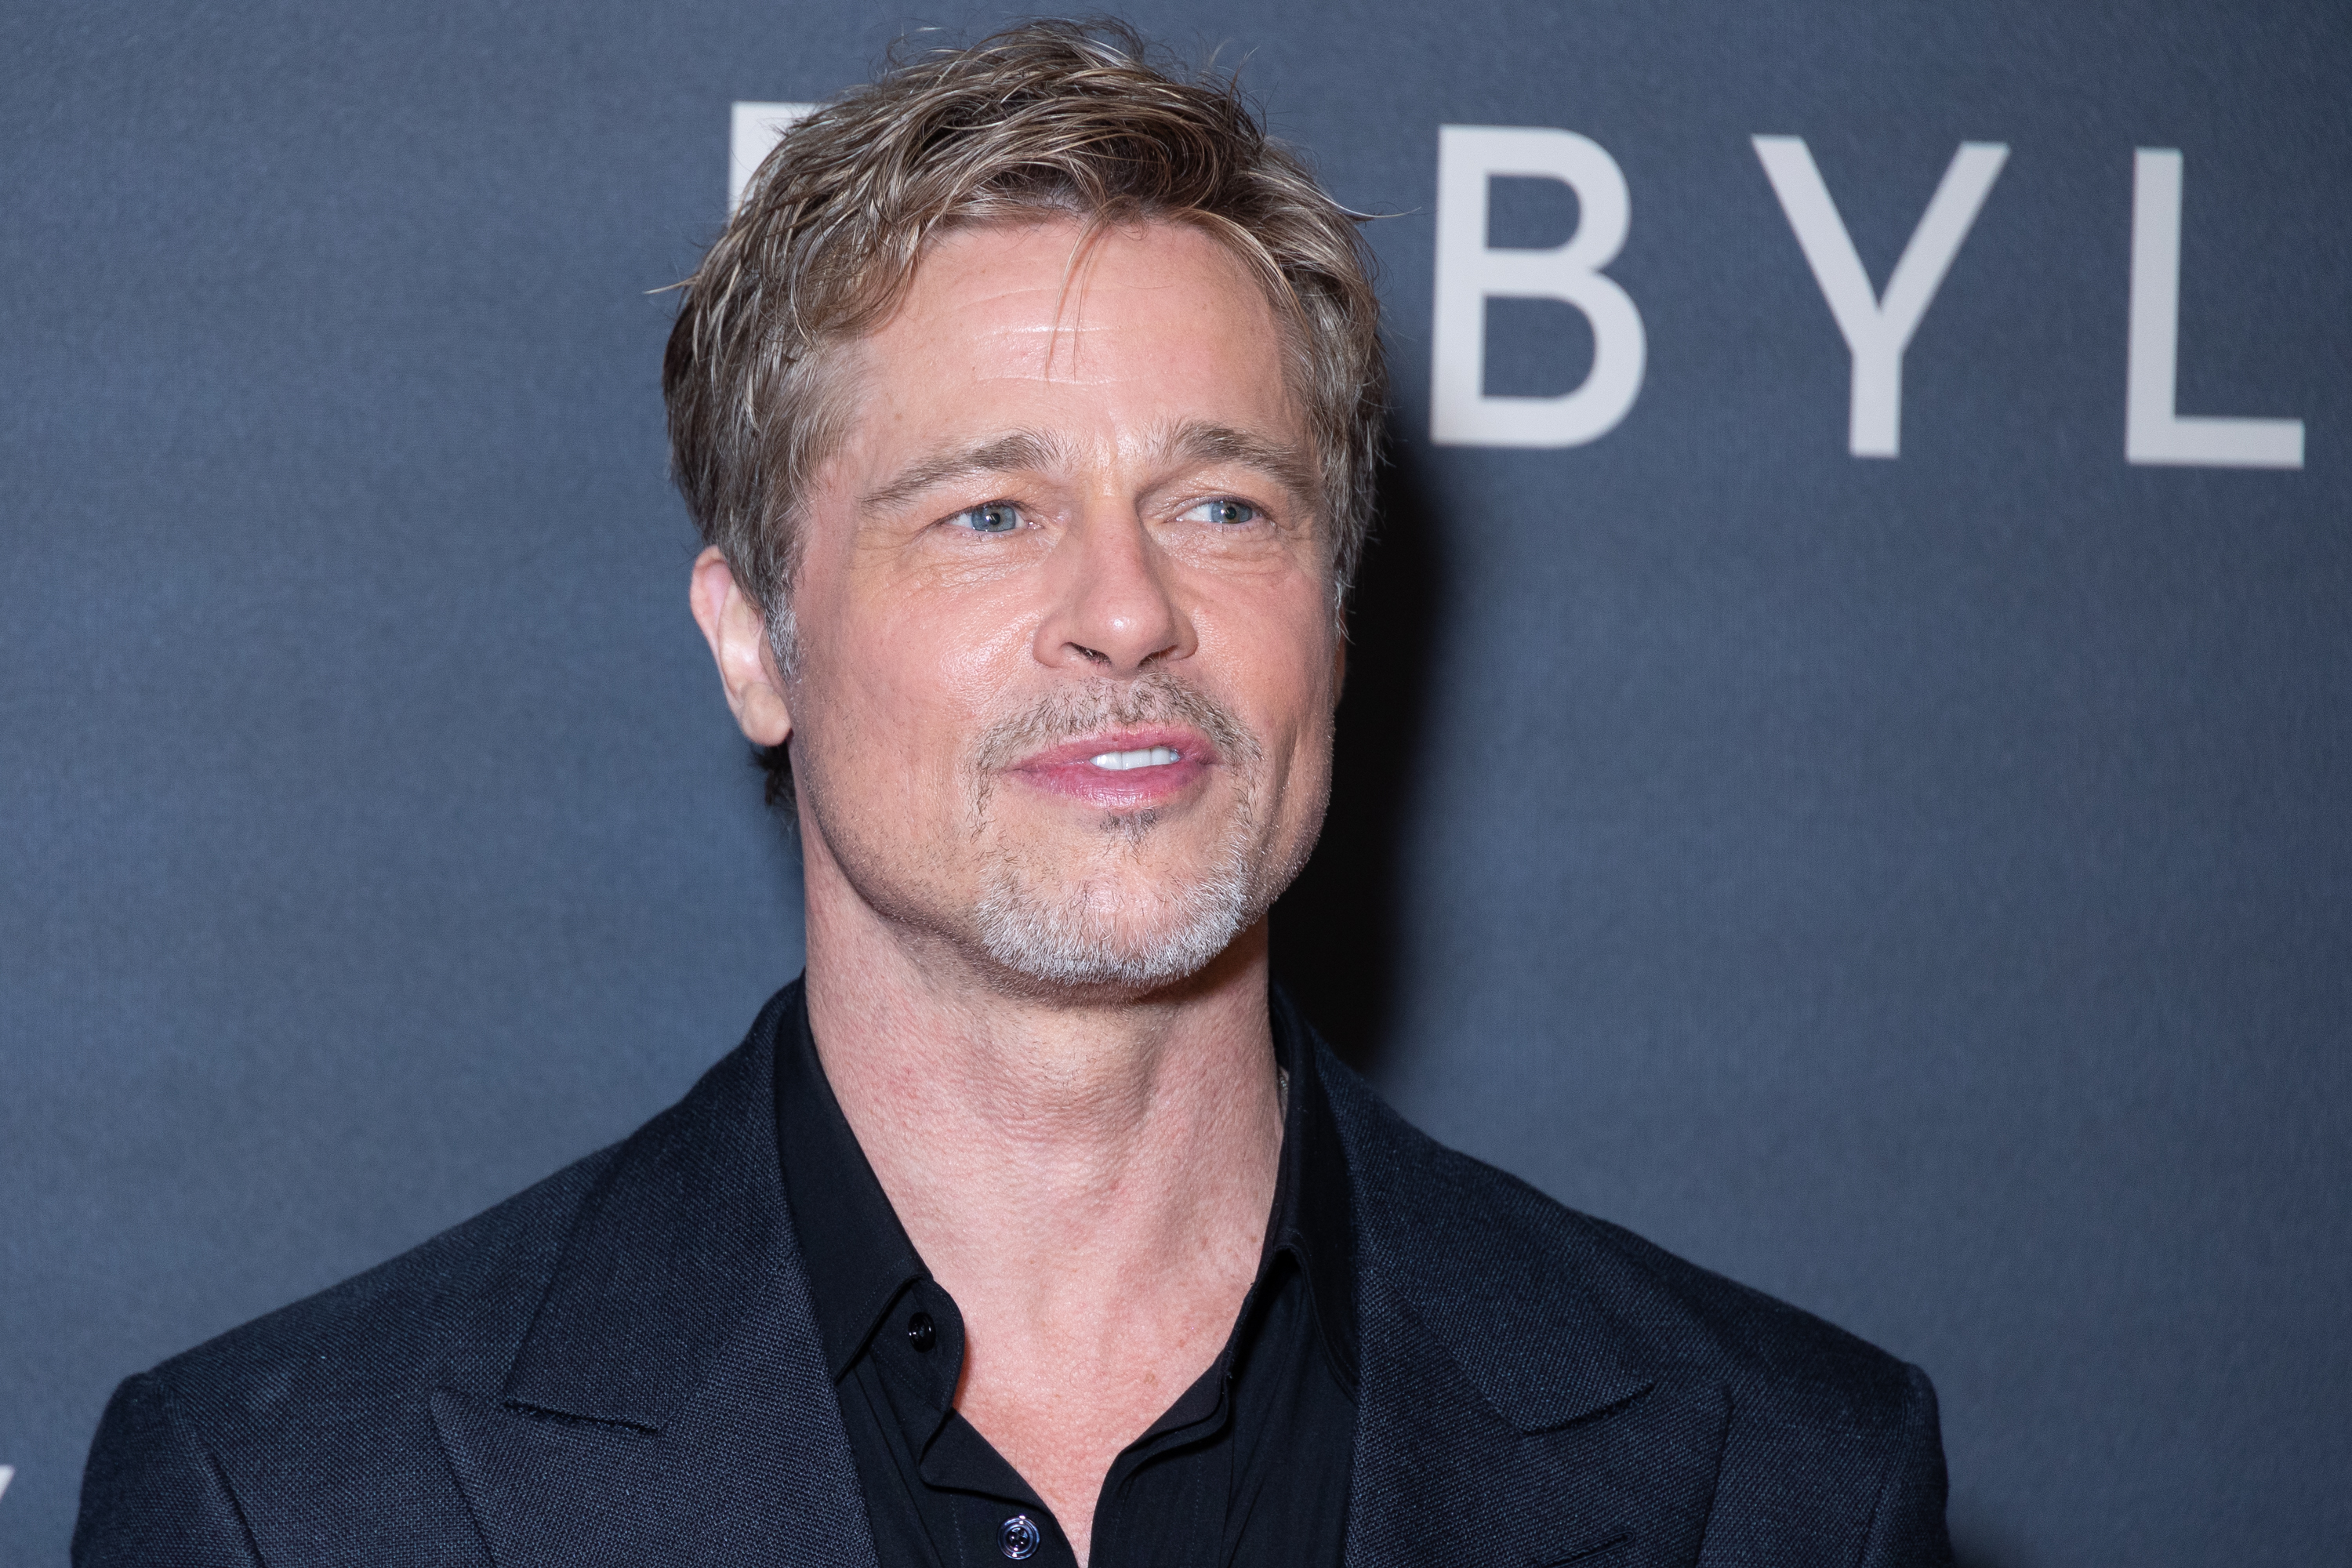 Brad Pitt at the premiere for "Babylon" in Paris, 2023 | Source: Getty Images